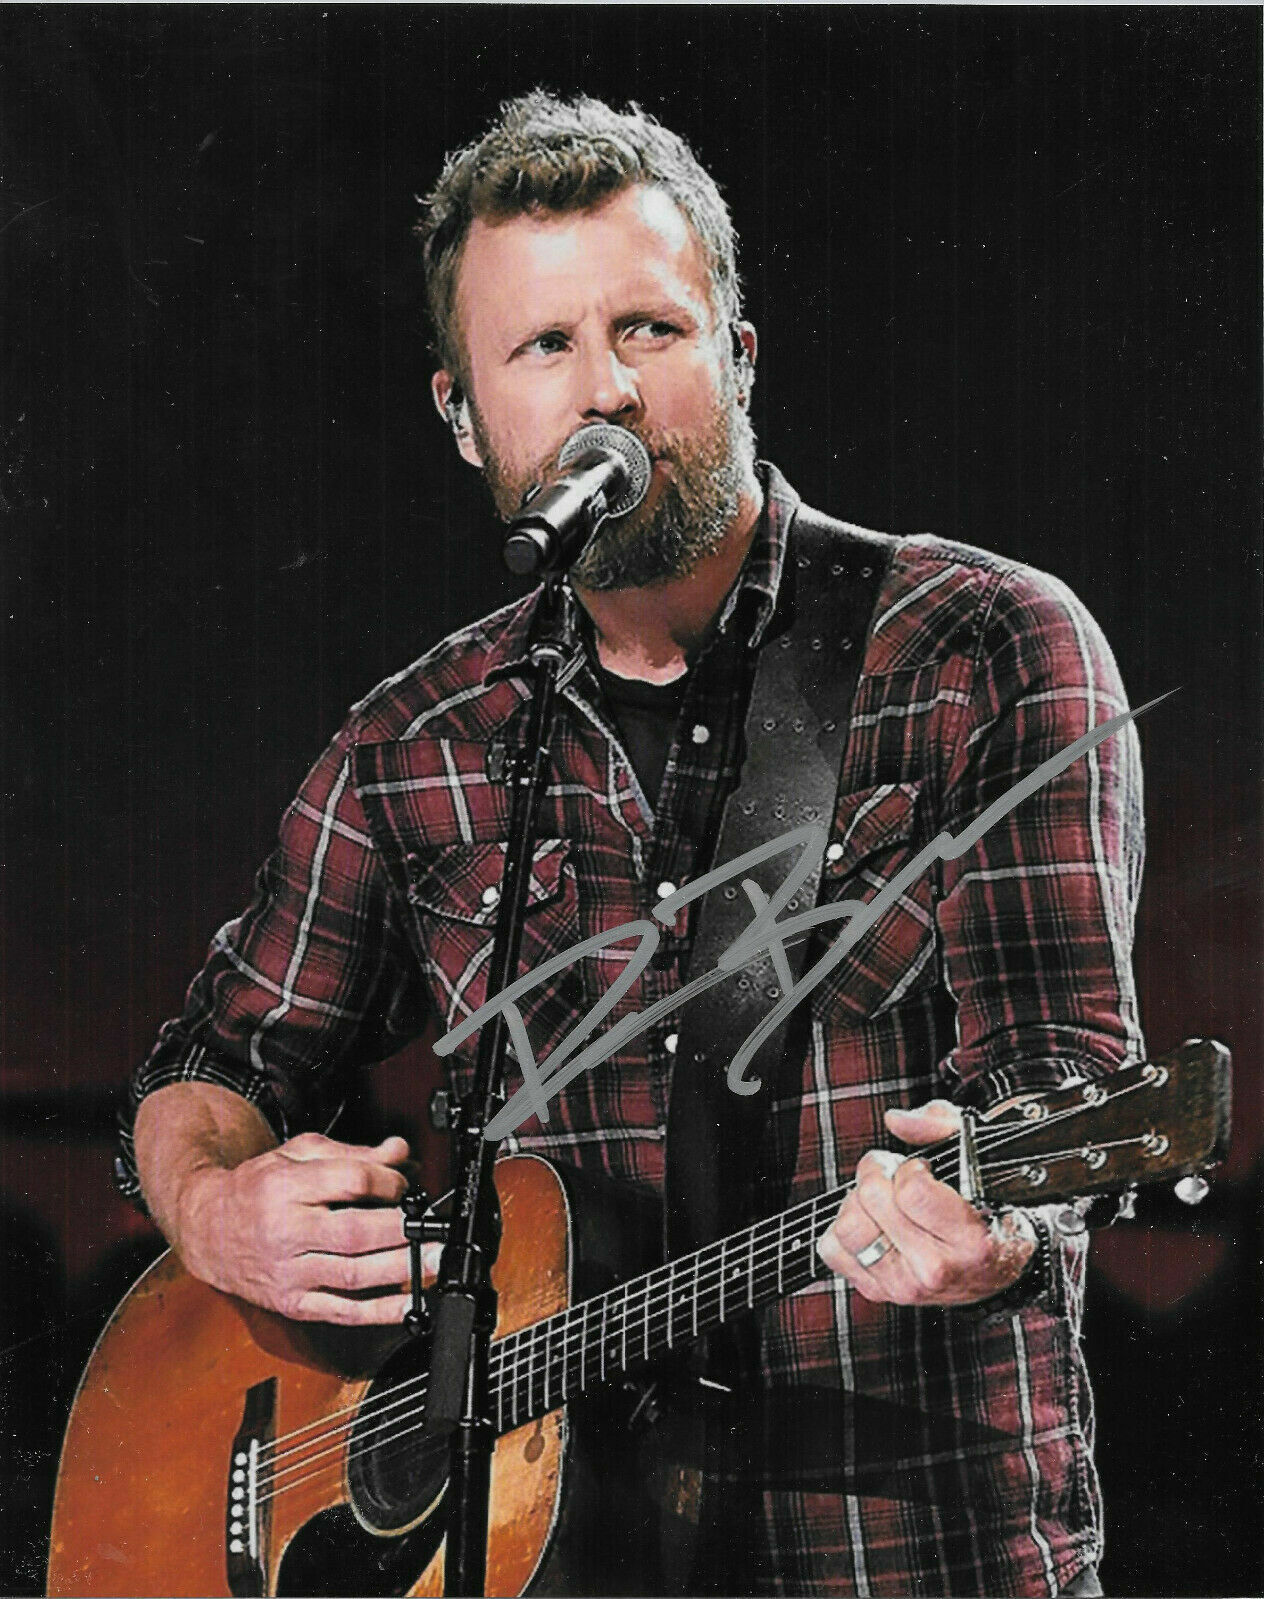 Dierks Bentley Autographed Signed 8x10 Photo Poster painting REPRINT